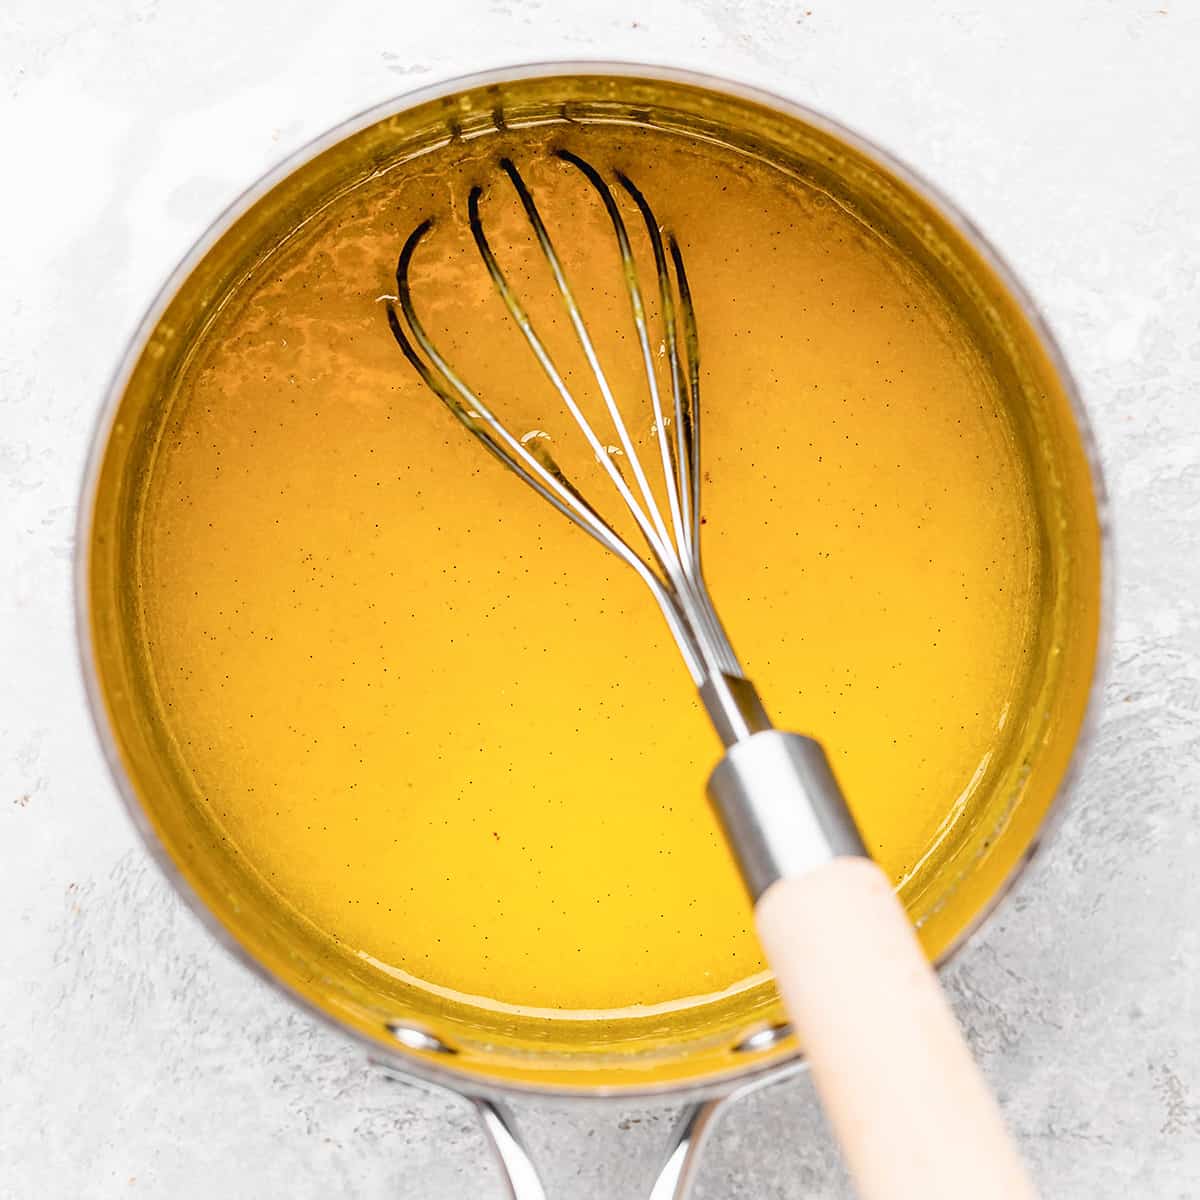 lemon curd being cooked and whisked in a saucepan